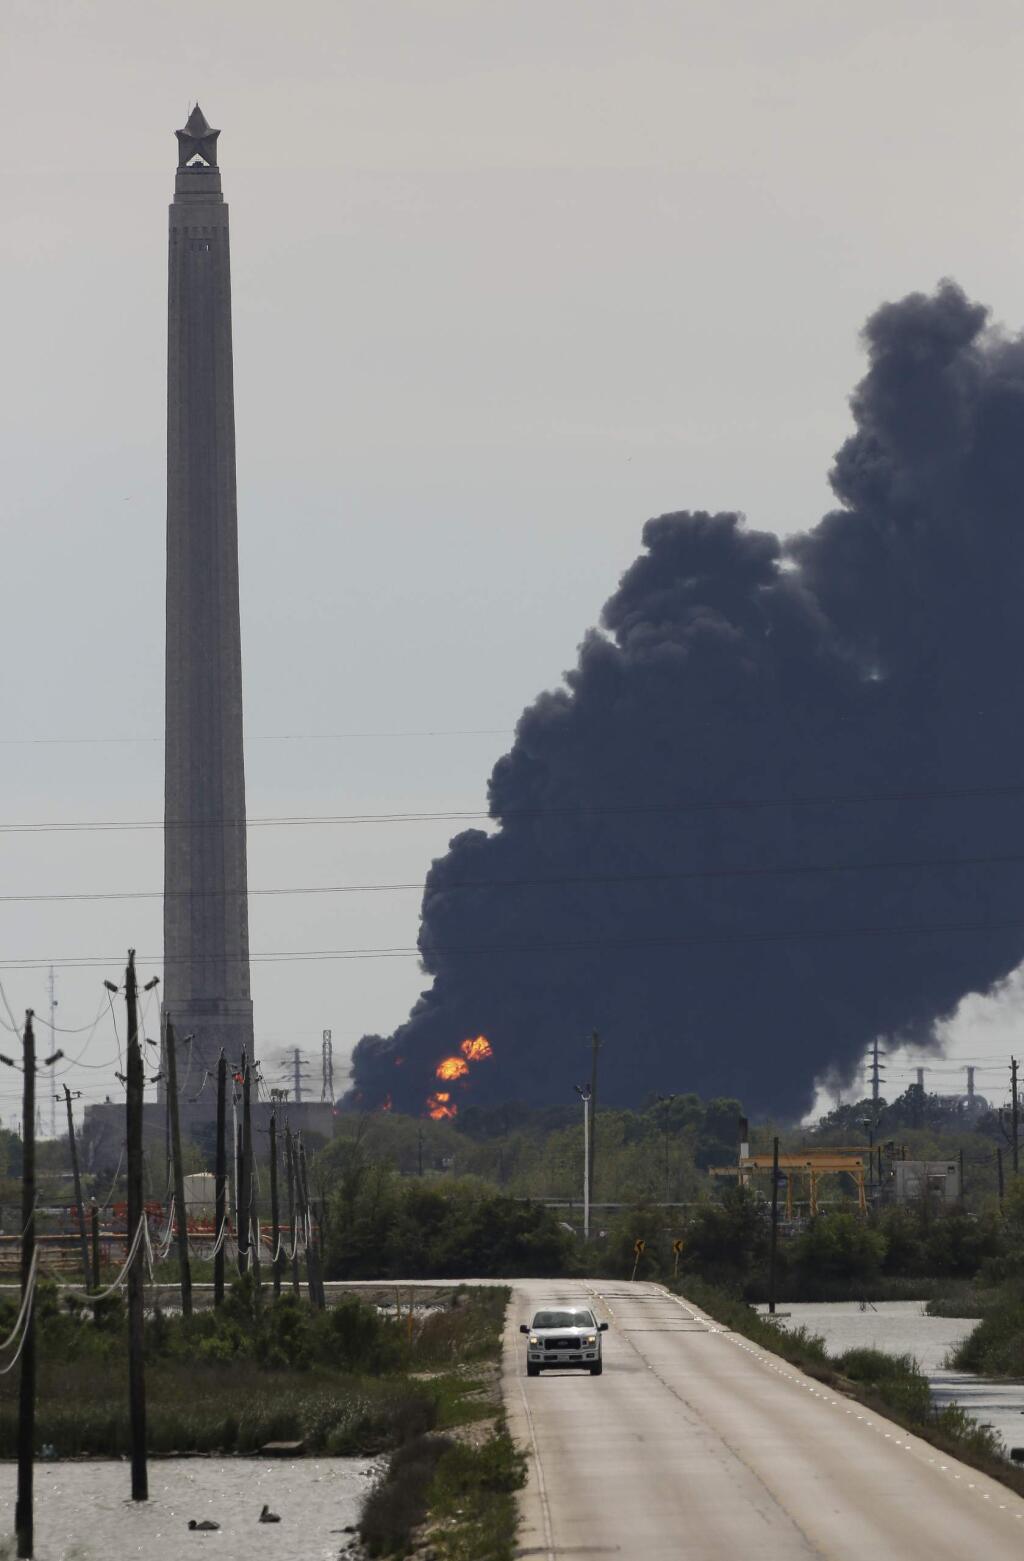 A view of the petrochemical fire at the Intercontinental Terminals Company, which is less than two miles southwest of the San Jacinto Memorial Monday, March 18, 2019, in Baytown, Texas. The large fire at a Houston-area petrochemicals terminal will likely burn for another two days, authorities said Monday, noting that air quality around the facility was testing within normal guidelines. ( Godofredo A. Vasquez/Houston Chronicle via AP)